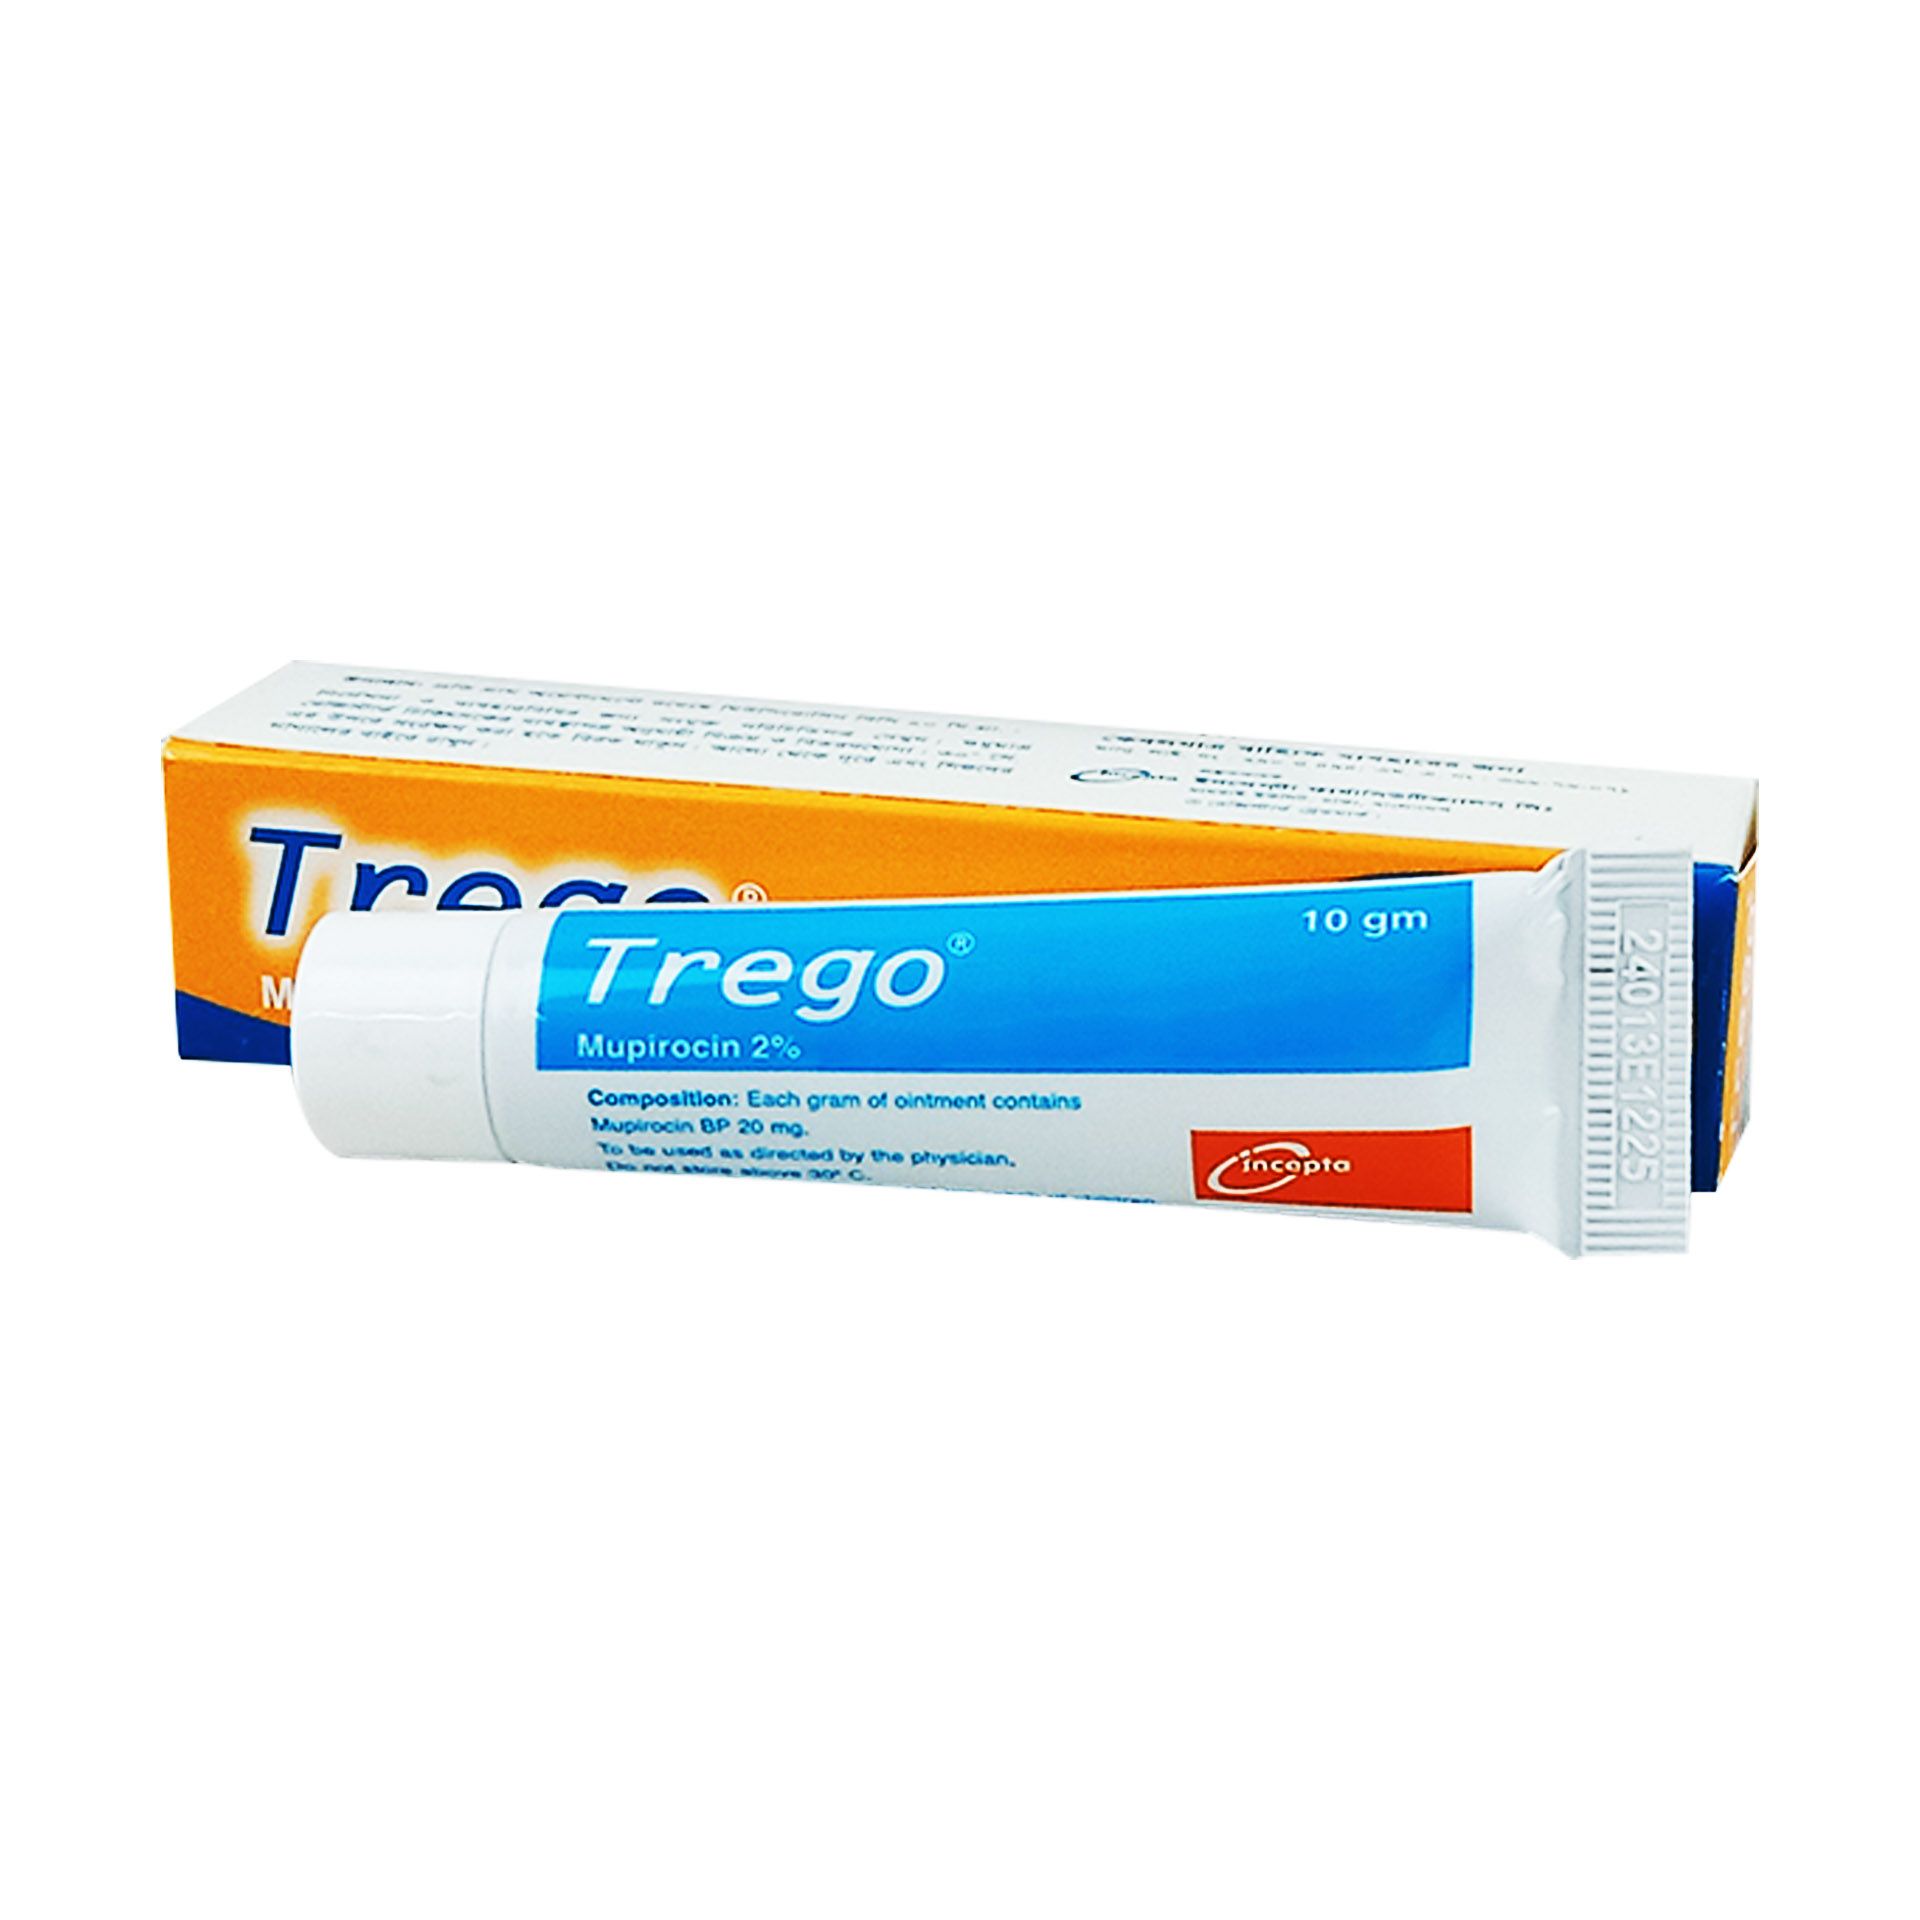 Trego 2% 2% Ointment